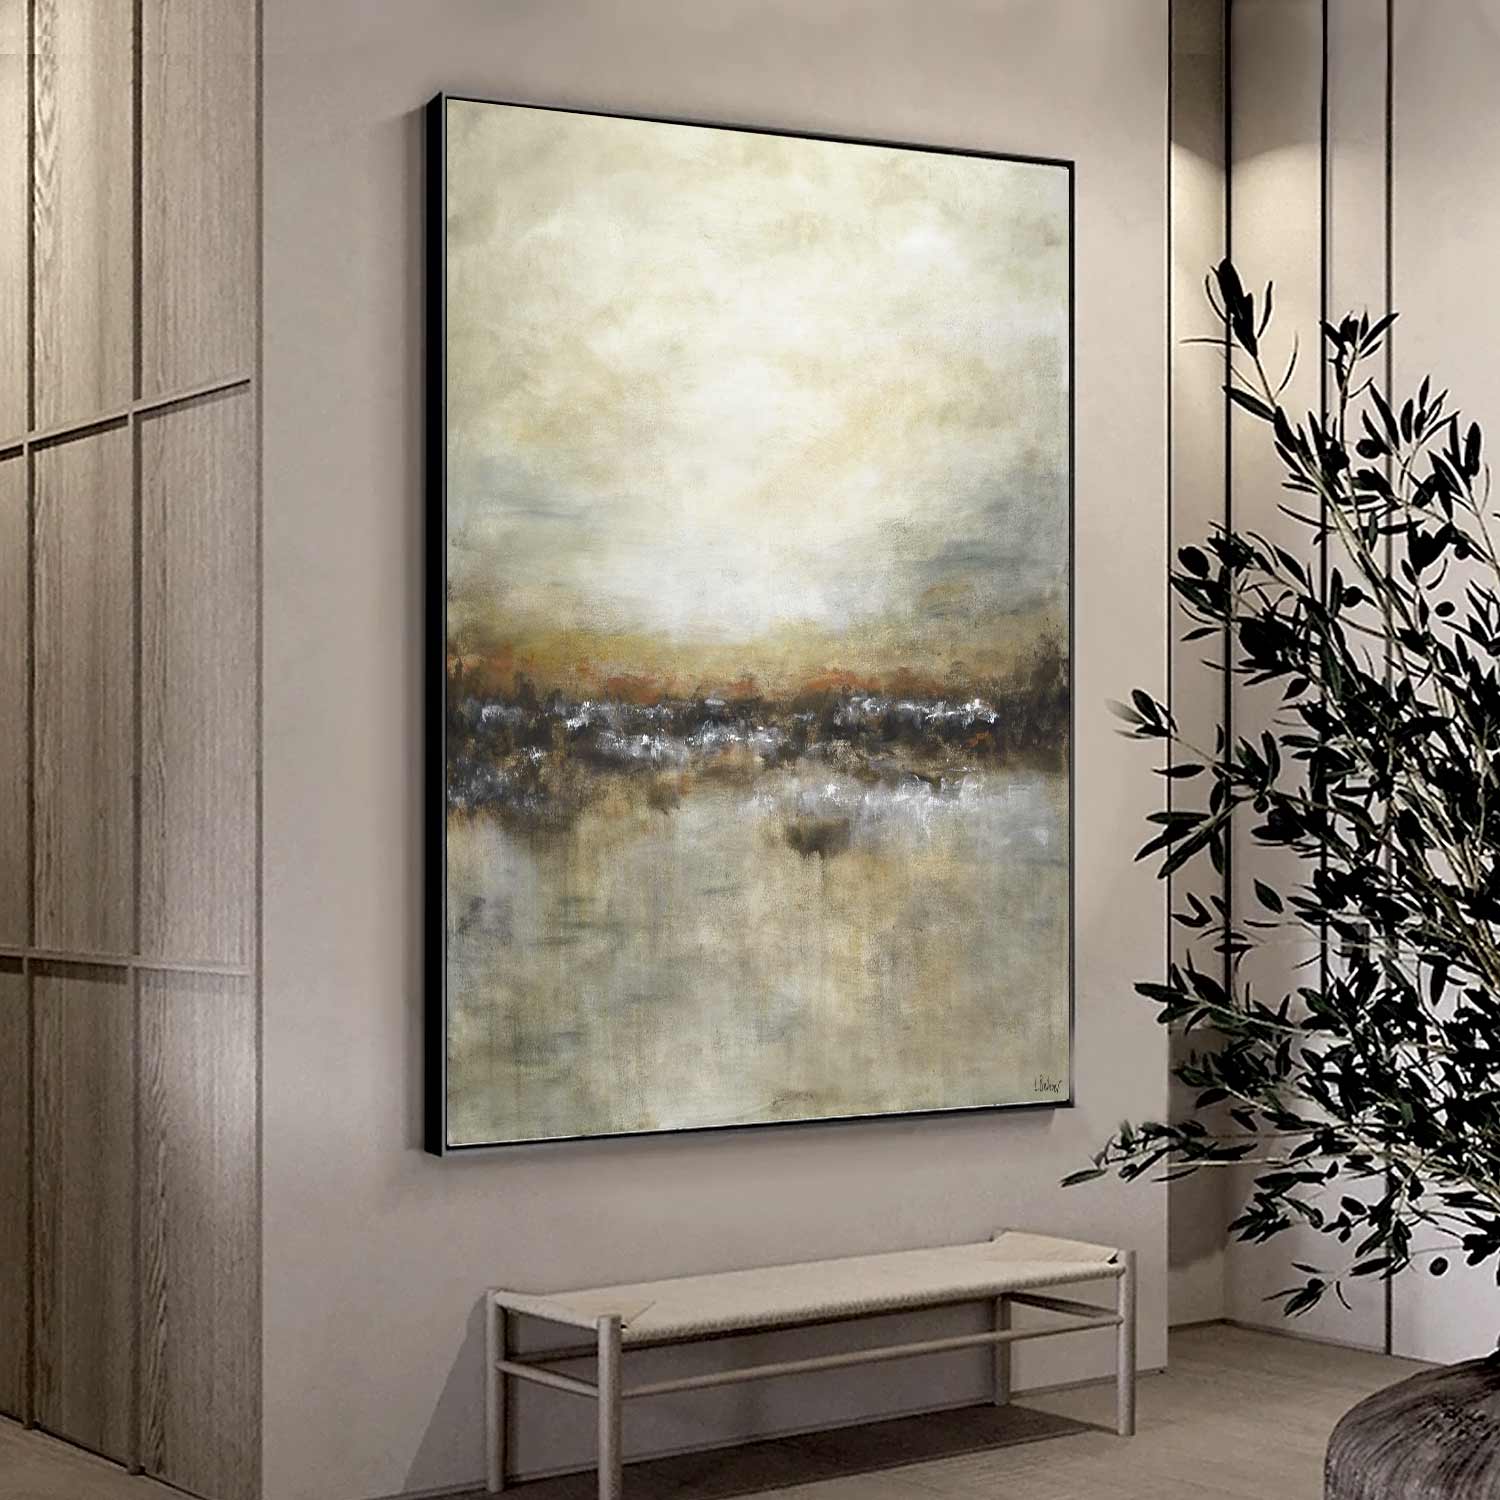 Vertical Earth Tones Abstract Painting "Not Afraid"